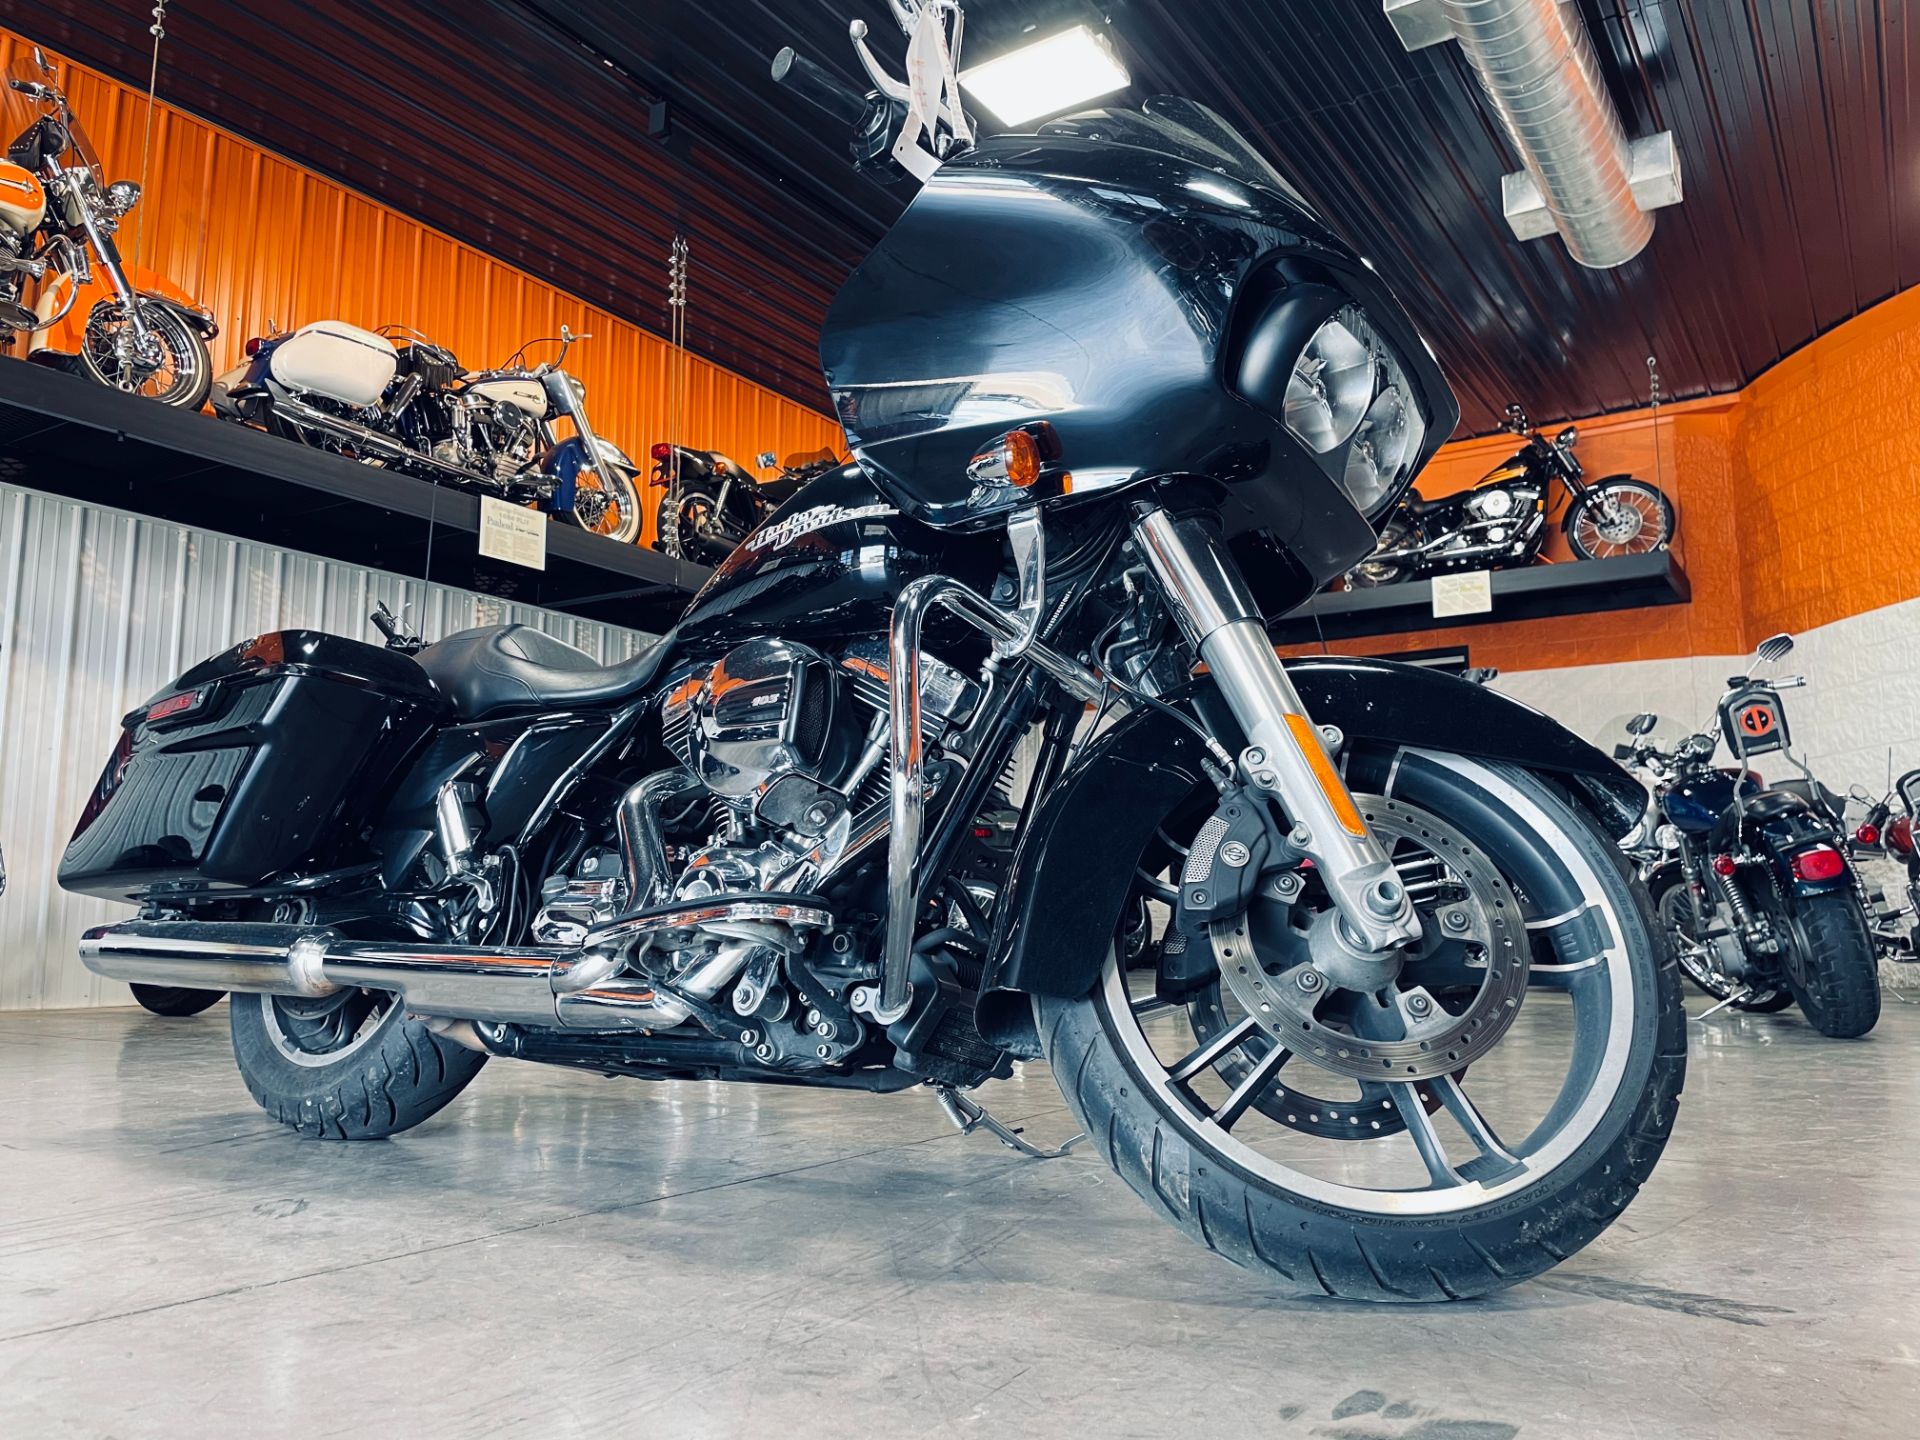 Used 2016 Harley Davidson Road Glide Special Black Quartz W Pinstripe Motorcycles In Marion Il U654593a